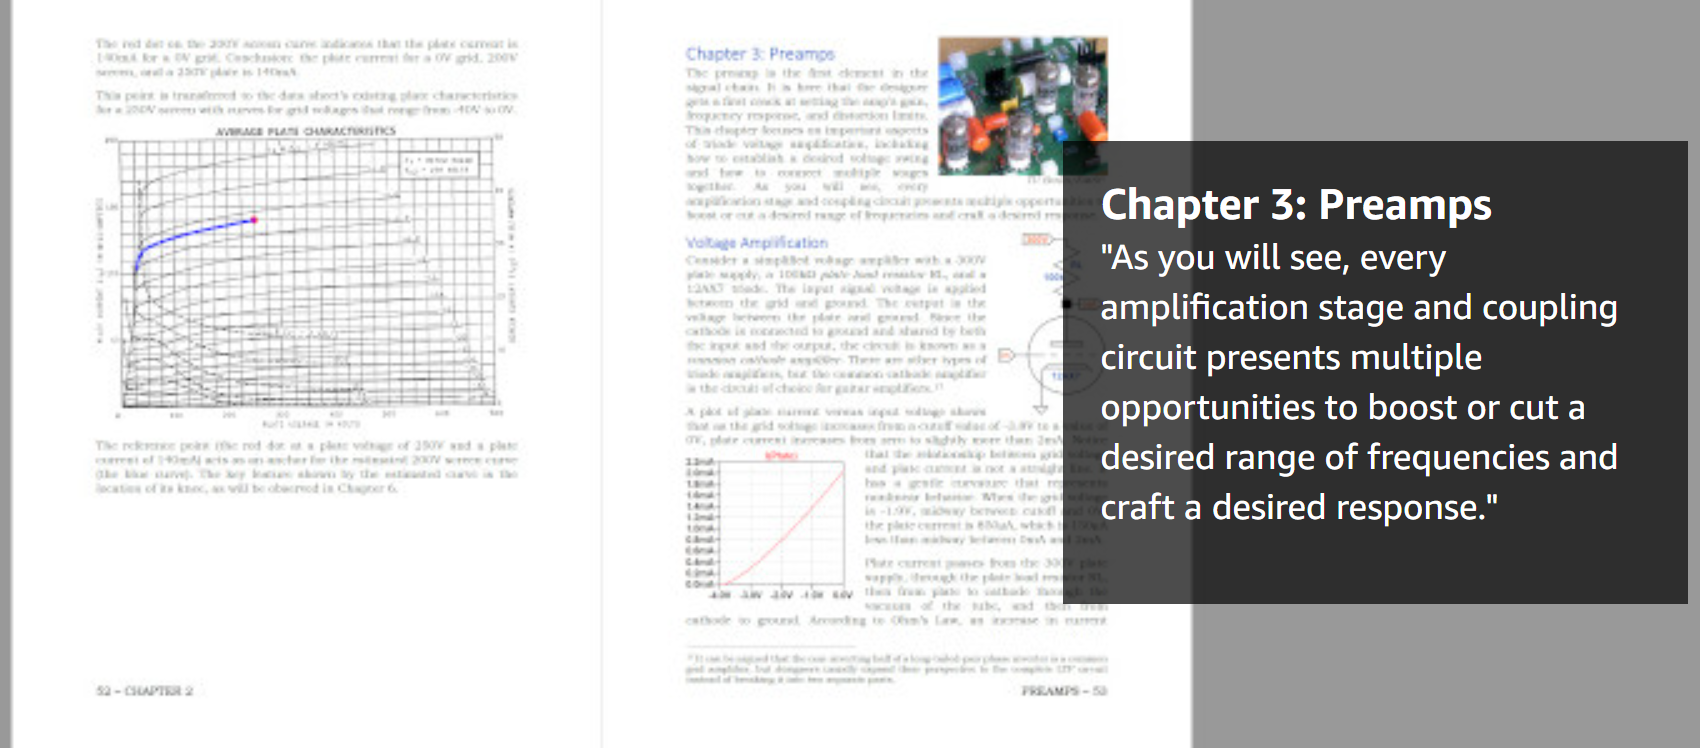 Guitar Amplifier Electronics Basic Theory book excerpt